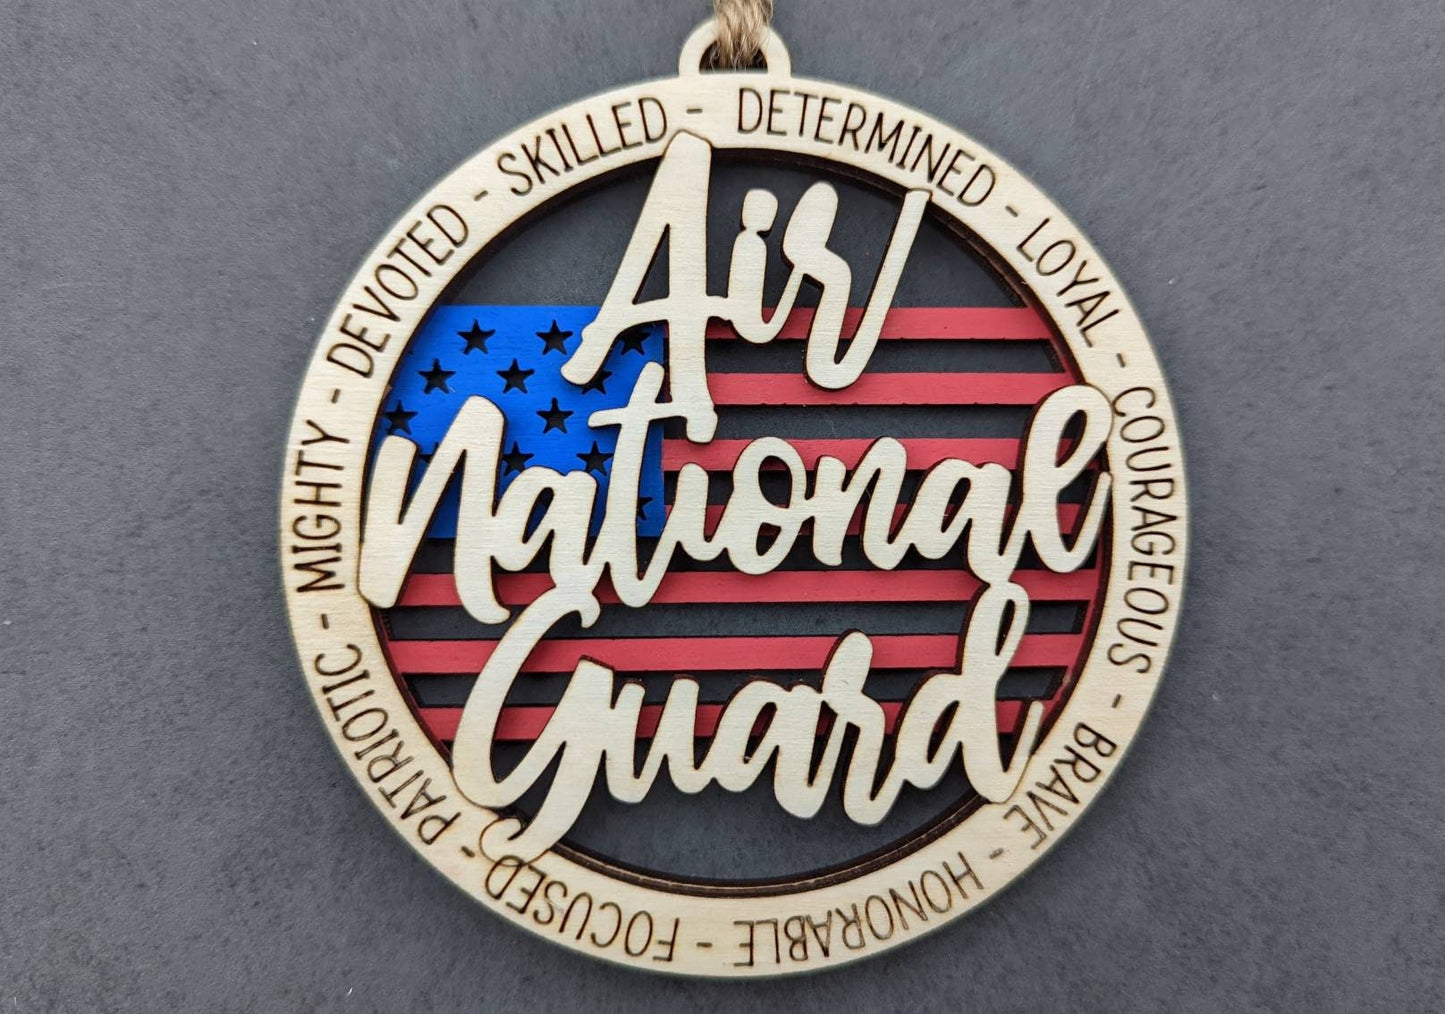 Air National Guard svg, Military svg - Ornament or car charm svg - Double layered military ornament with flag background - Cut and score Digital Download Designed for Glowforge